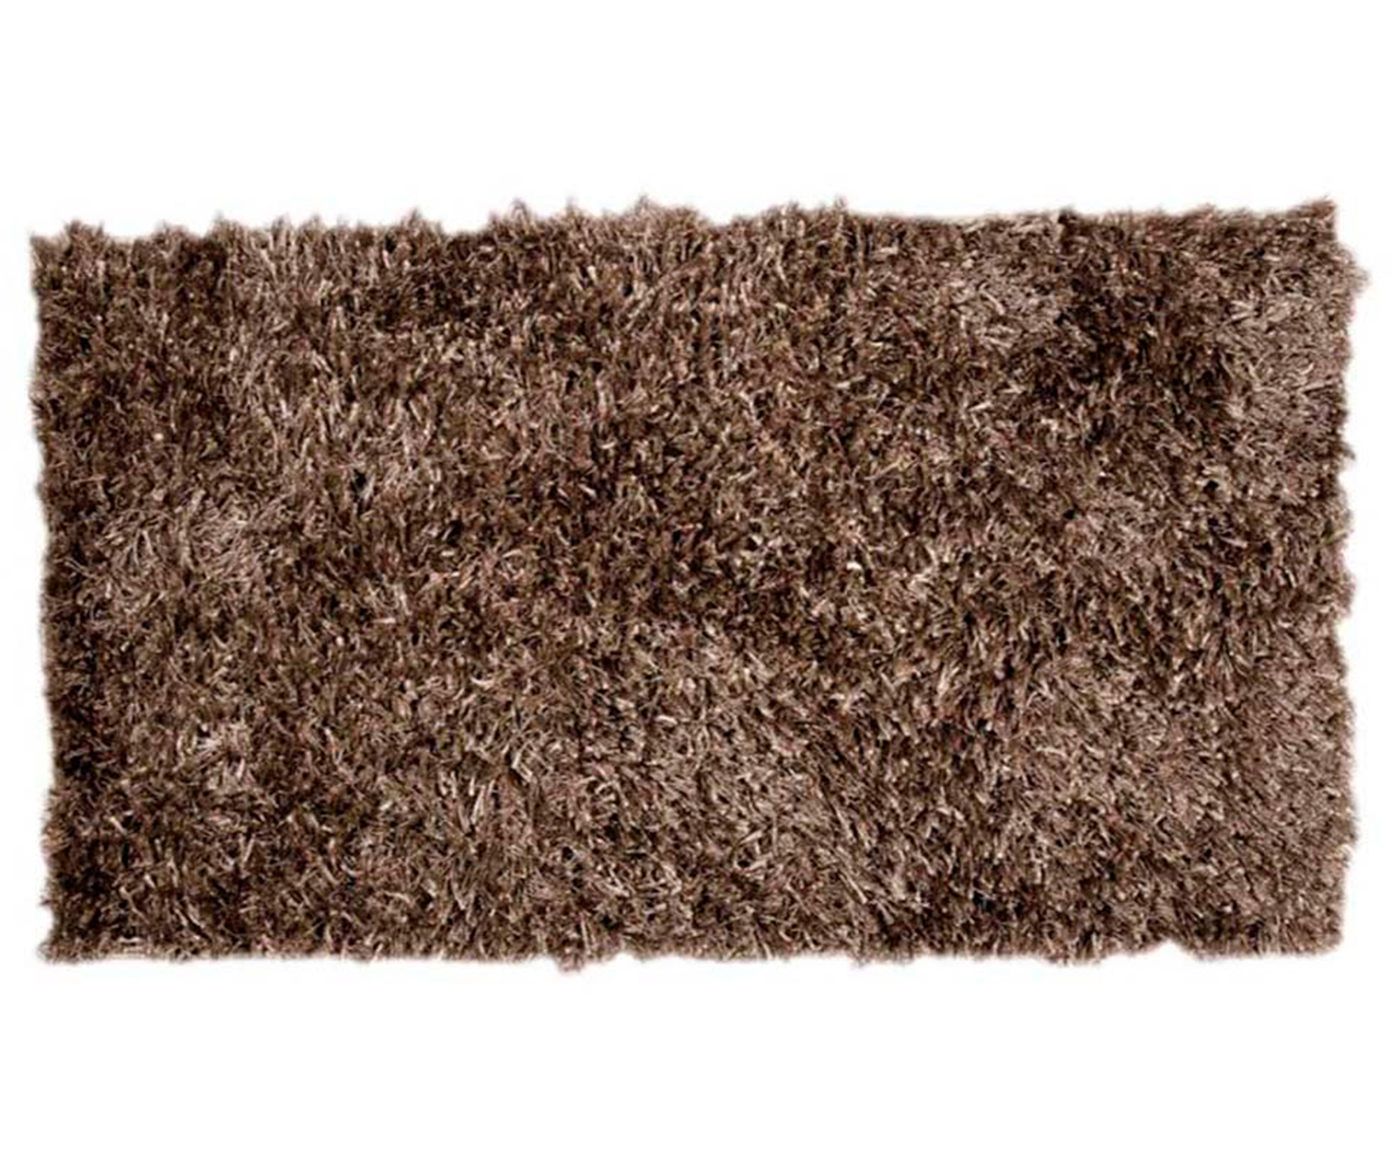 Tapete king especial shaggy ground - 150 x 200 cm | Westwing.com.br